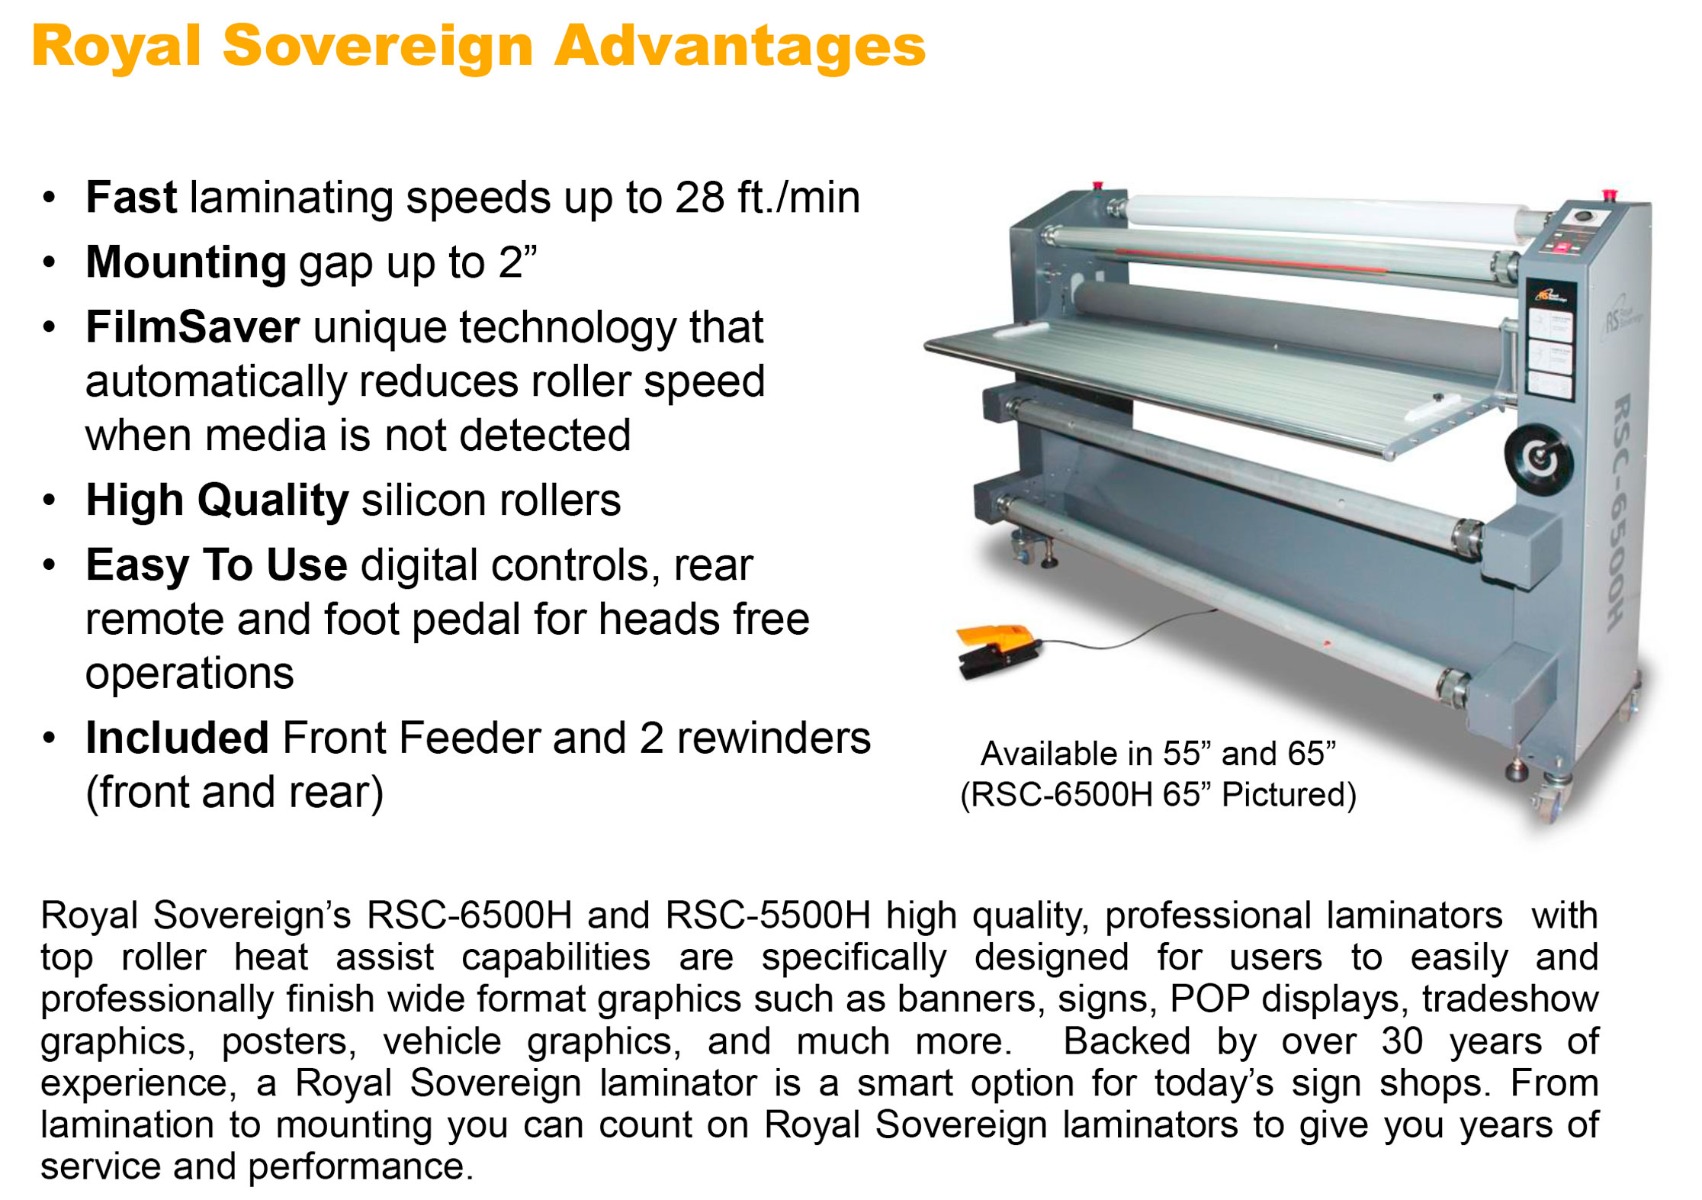 royal sovereign rsc-5500h laminator features including fast up to 28ft per minute 2